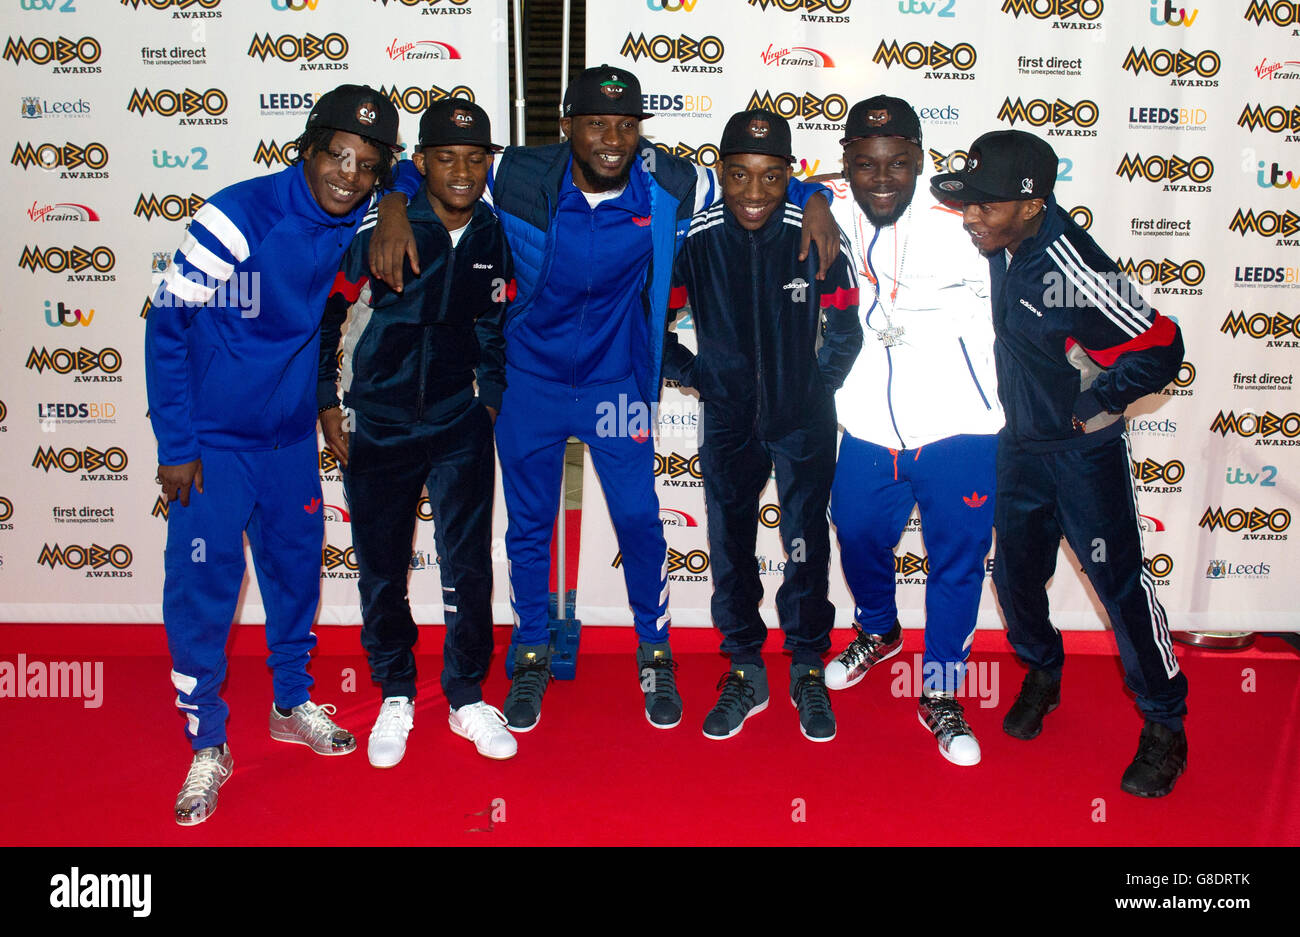 Section Boyz arriving at the Mobo Awards 2015, held at the First Direct Arena, Leeds. PRESS ASSOCIATION Photo. See PA story SHOWBIZ Mobos. Picture date: Wednesday November 4, 2015. Photo credit should read: Katja Ogrin/PA Wire Stock Photo